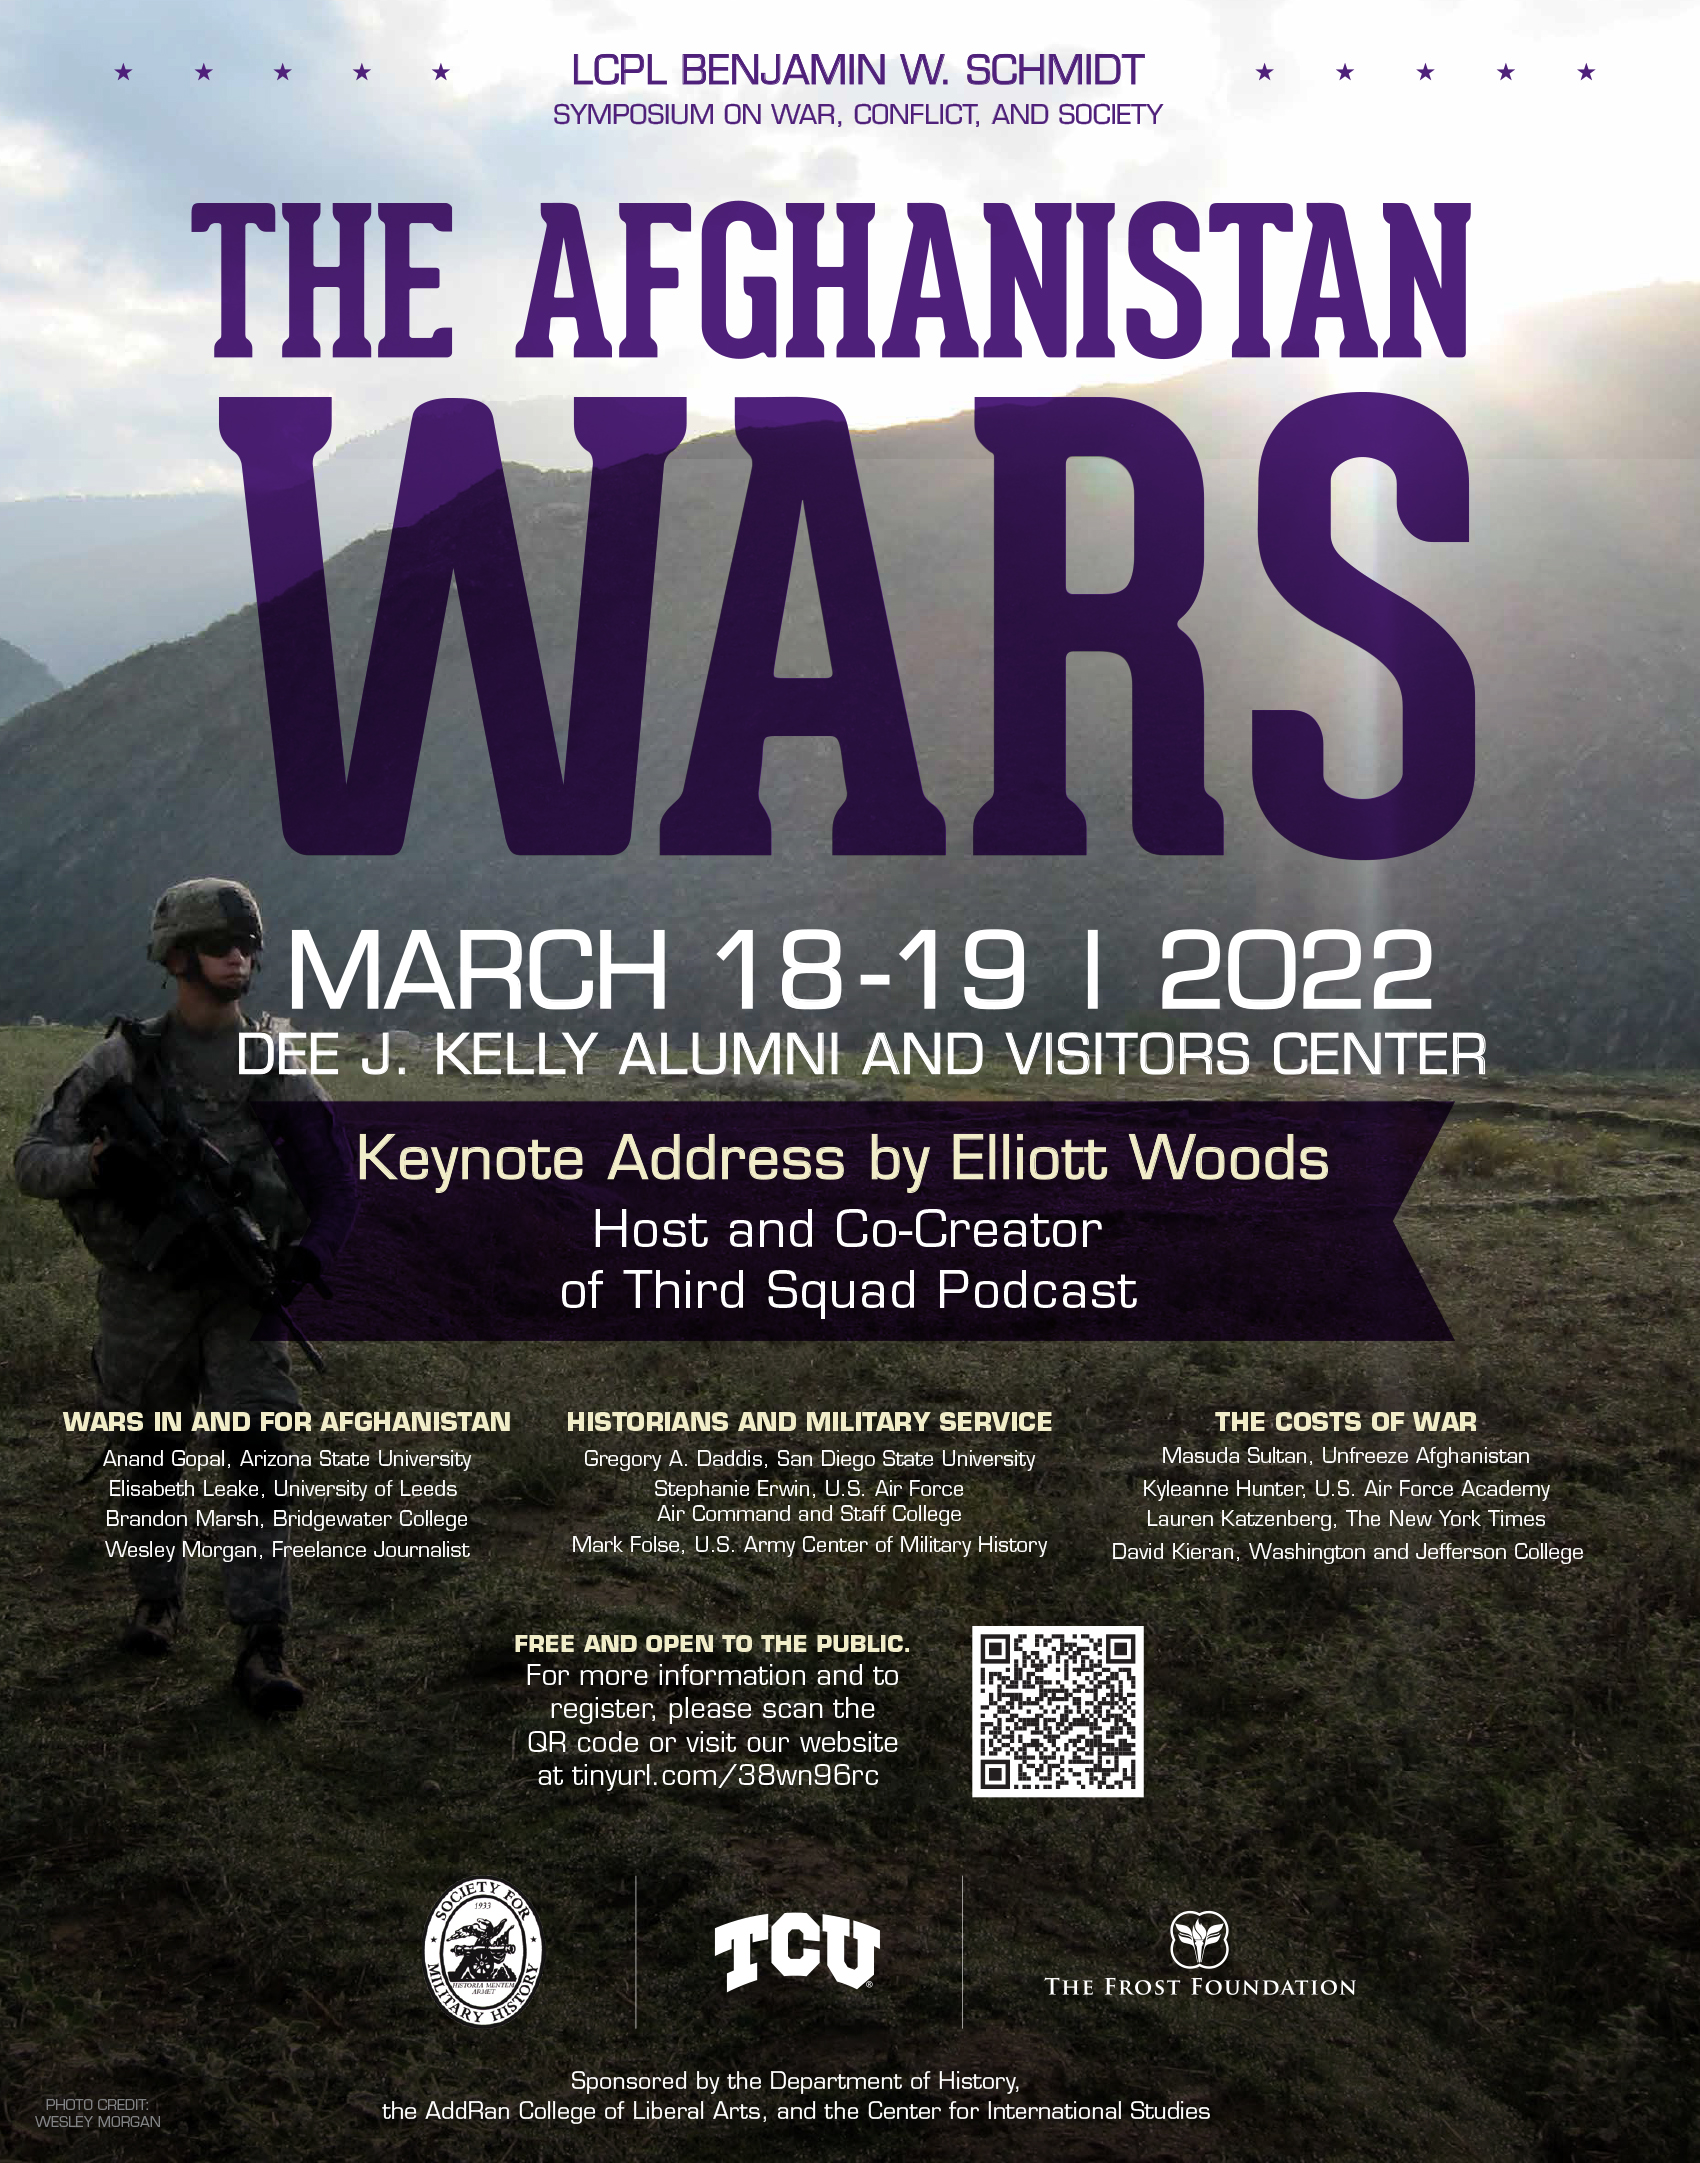 Flyer for 2022 symposium about the afghanistan wars